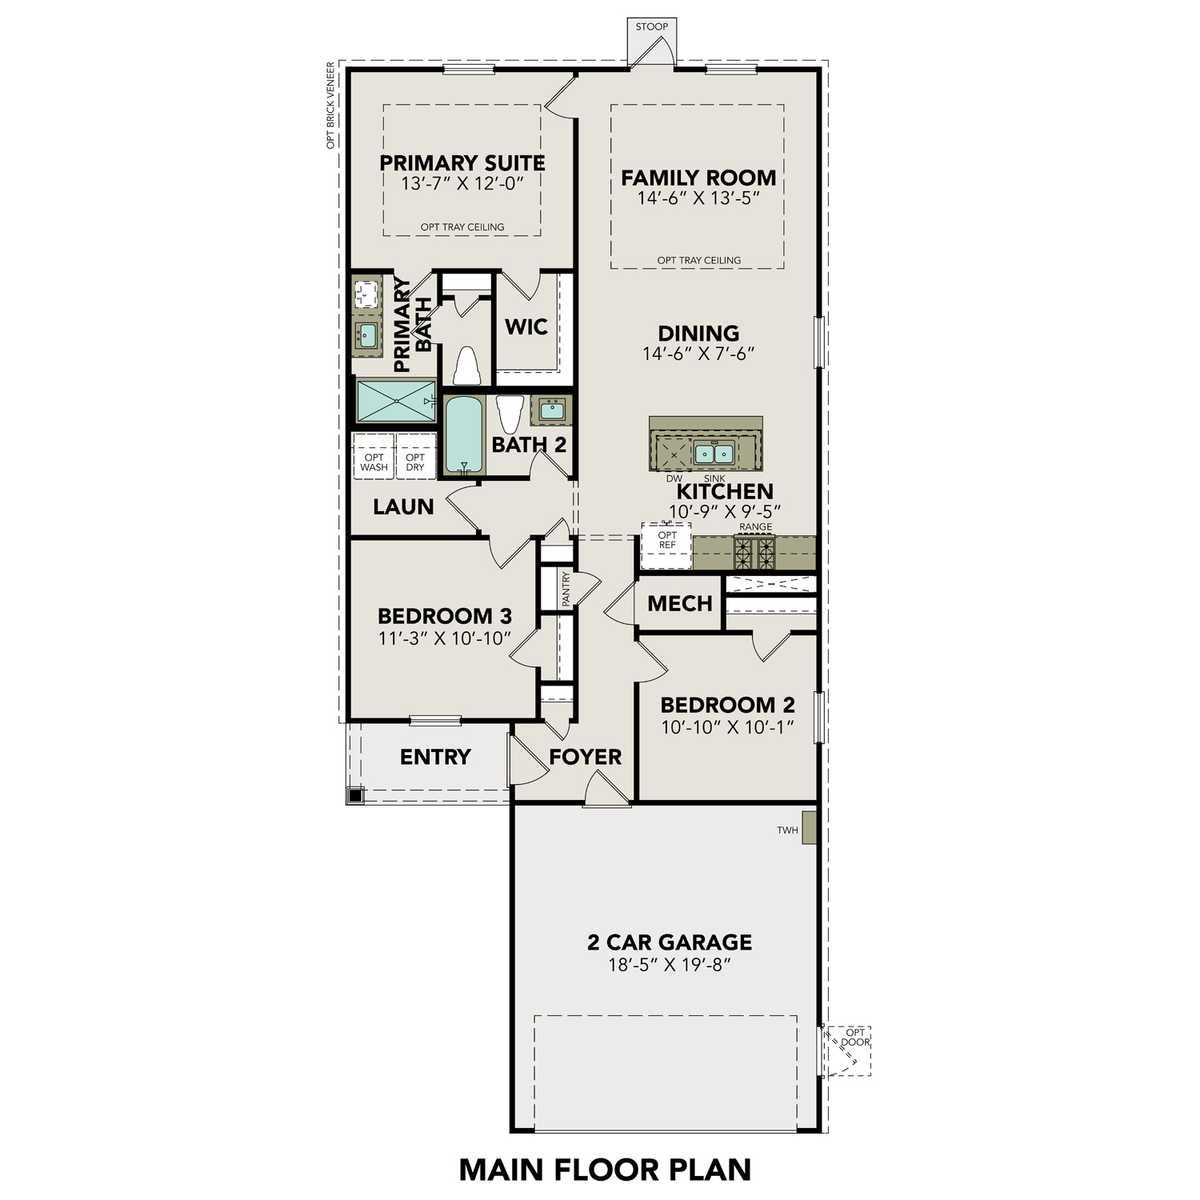 1 - The Comal D floor plan layout for 8308 Bristlecone Pine Way in Davidson Homes' Lakes at Black Oak community.